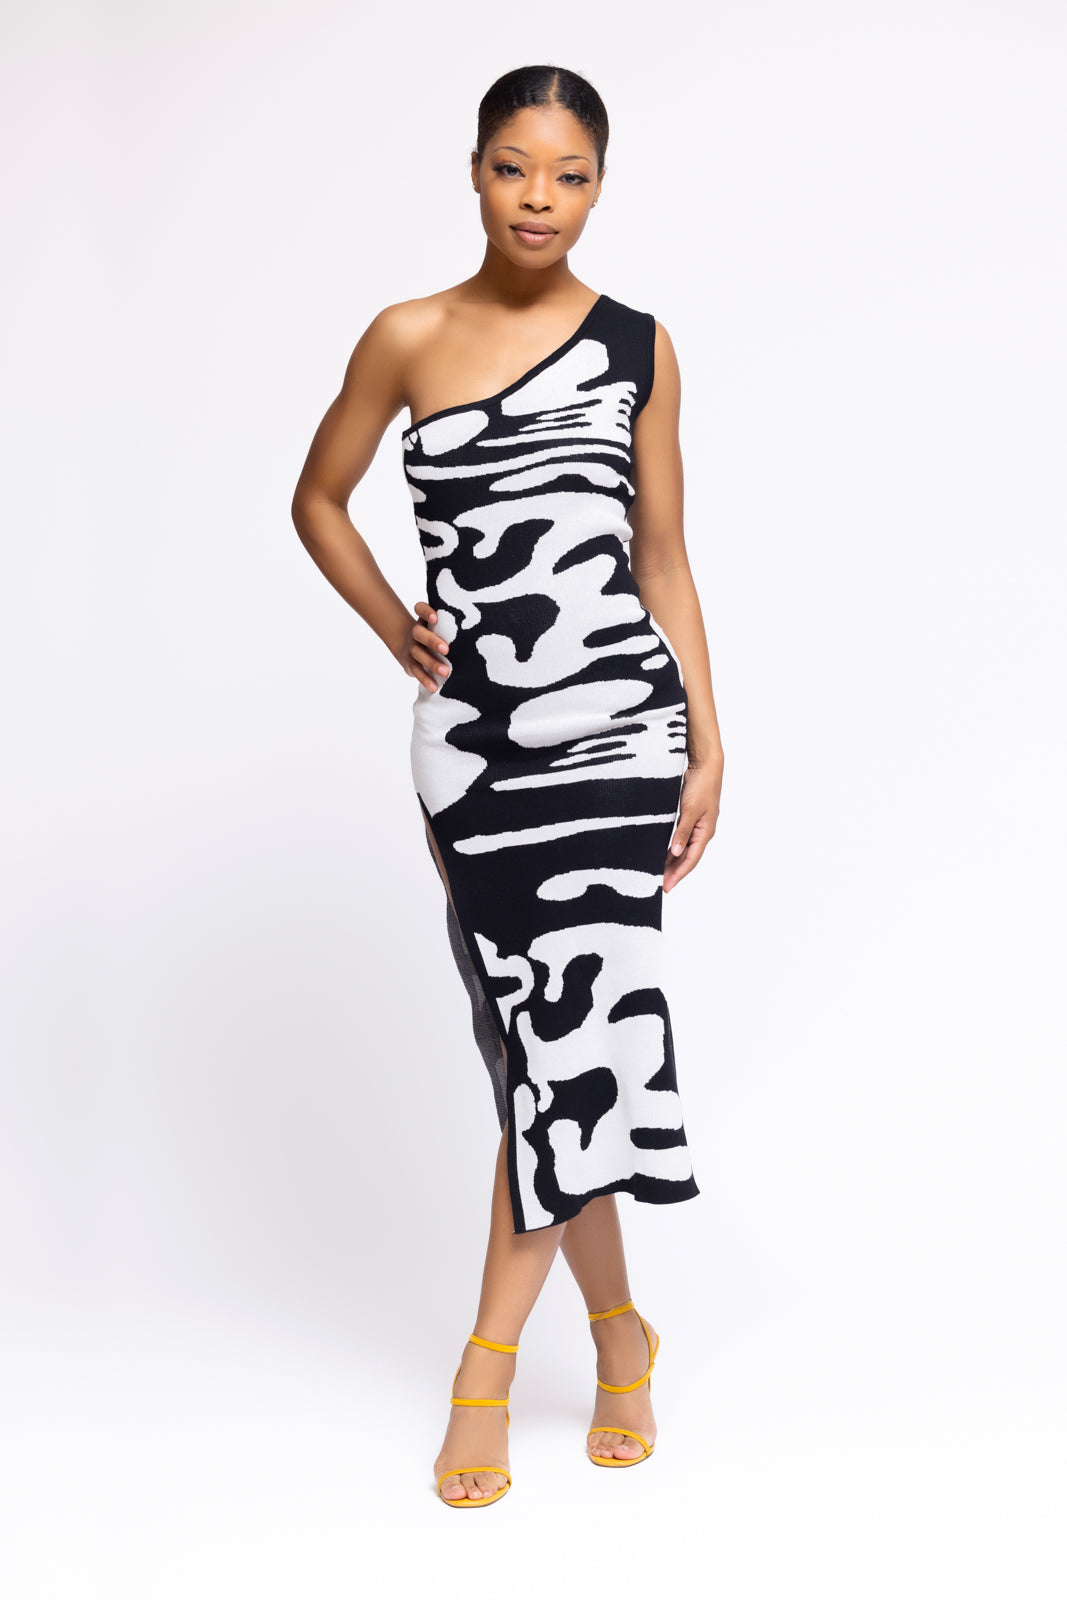 Women's Doesa Body Good Knit Midi - BaeBekillinem Boutique- Viscose- Black/ White- slit- cow- zebra- animal- One shoulder- maxi- below the knee- knitted- stretch- party- girls night- out- event